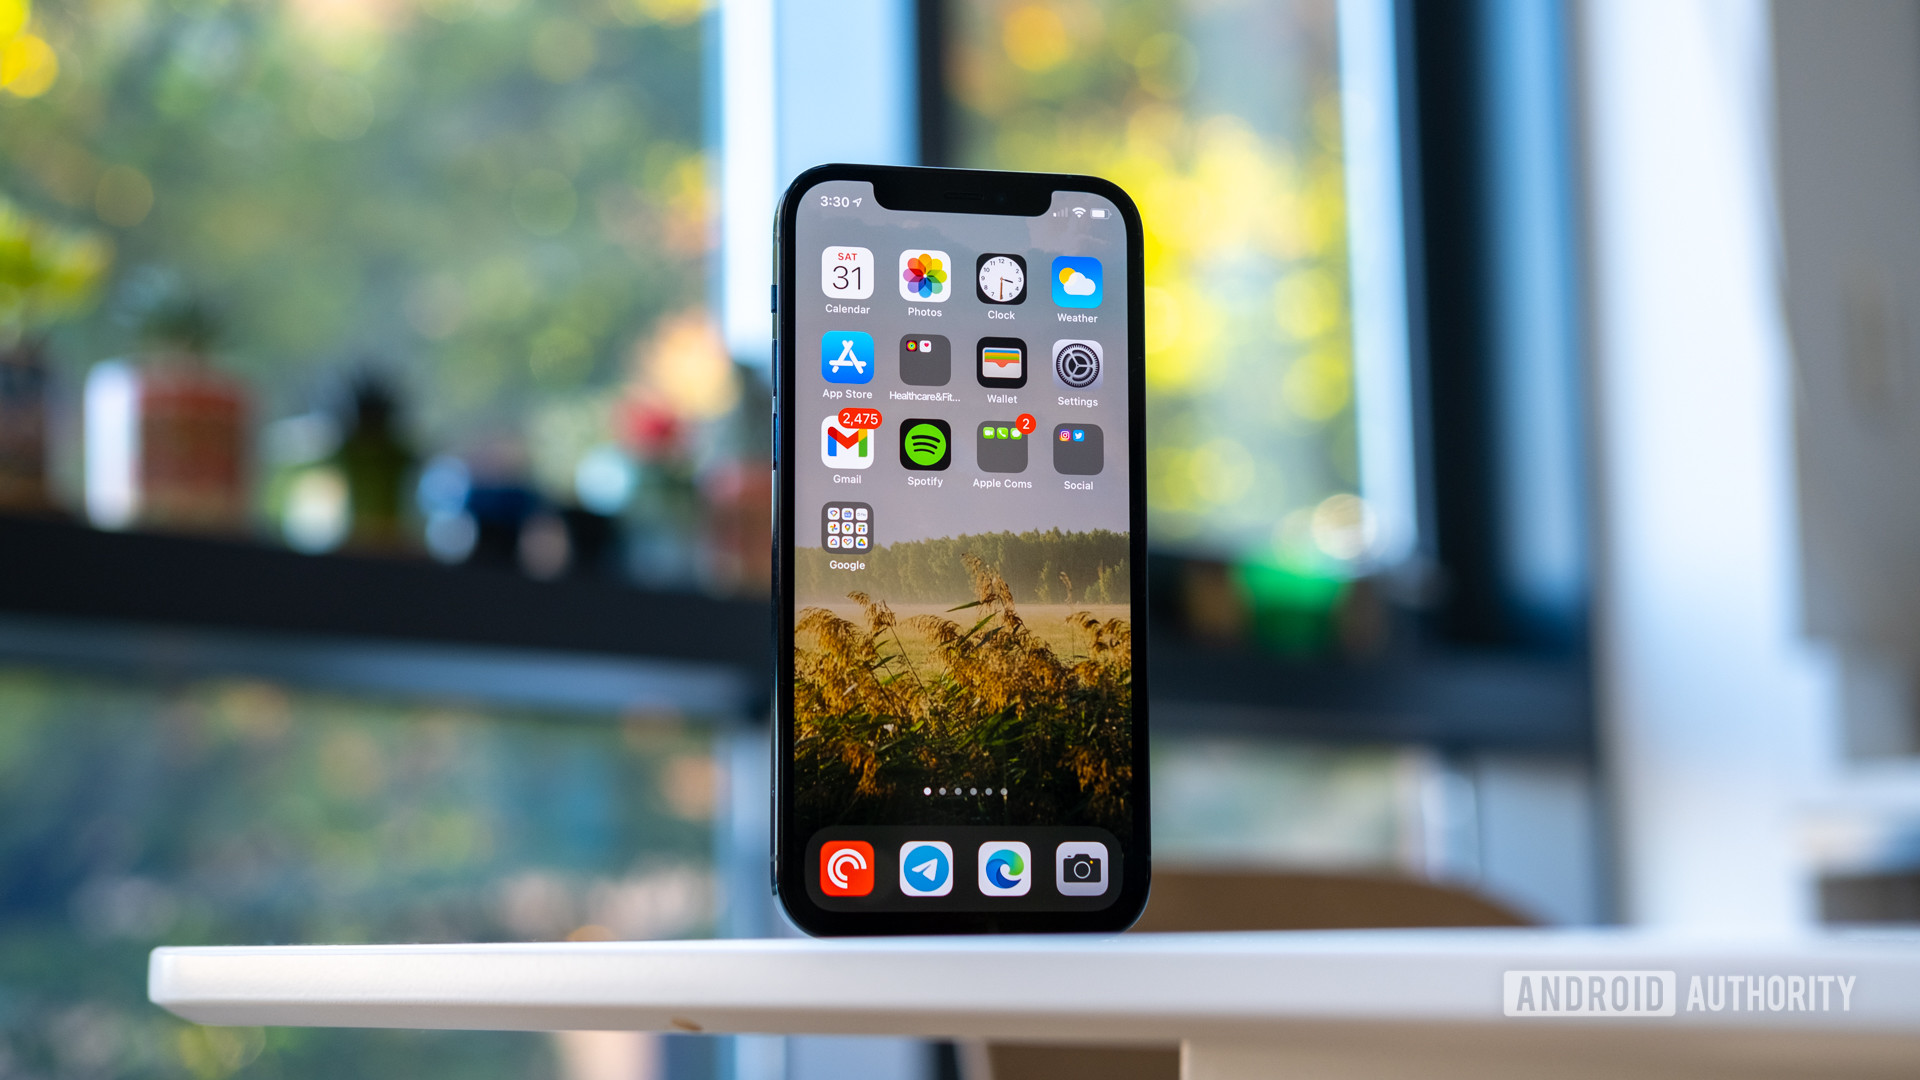 IPhone 12 Pro display on the table